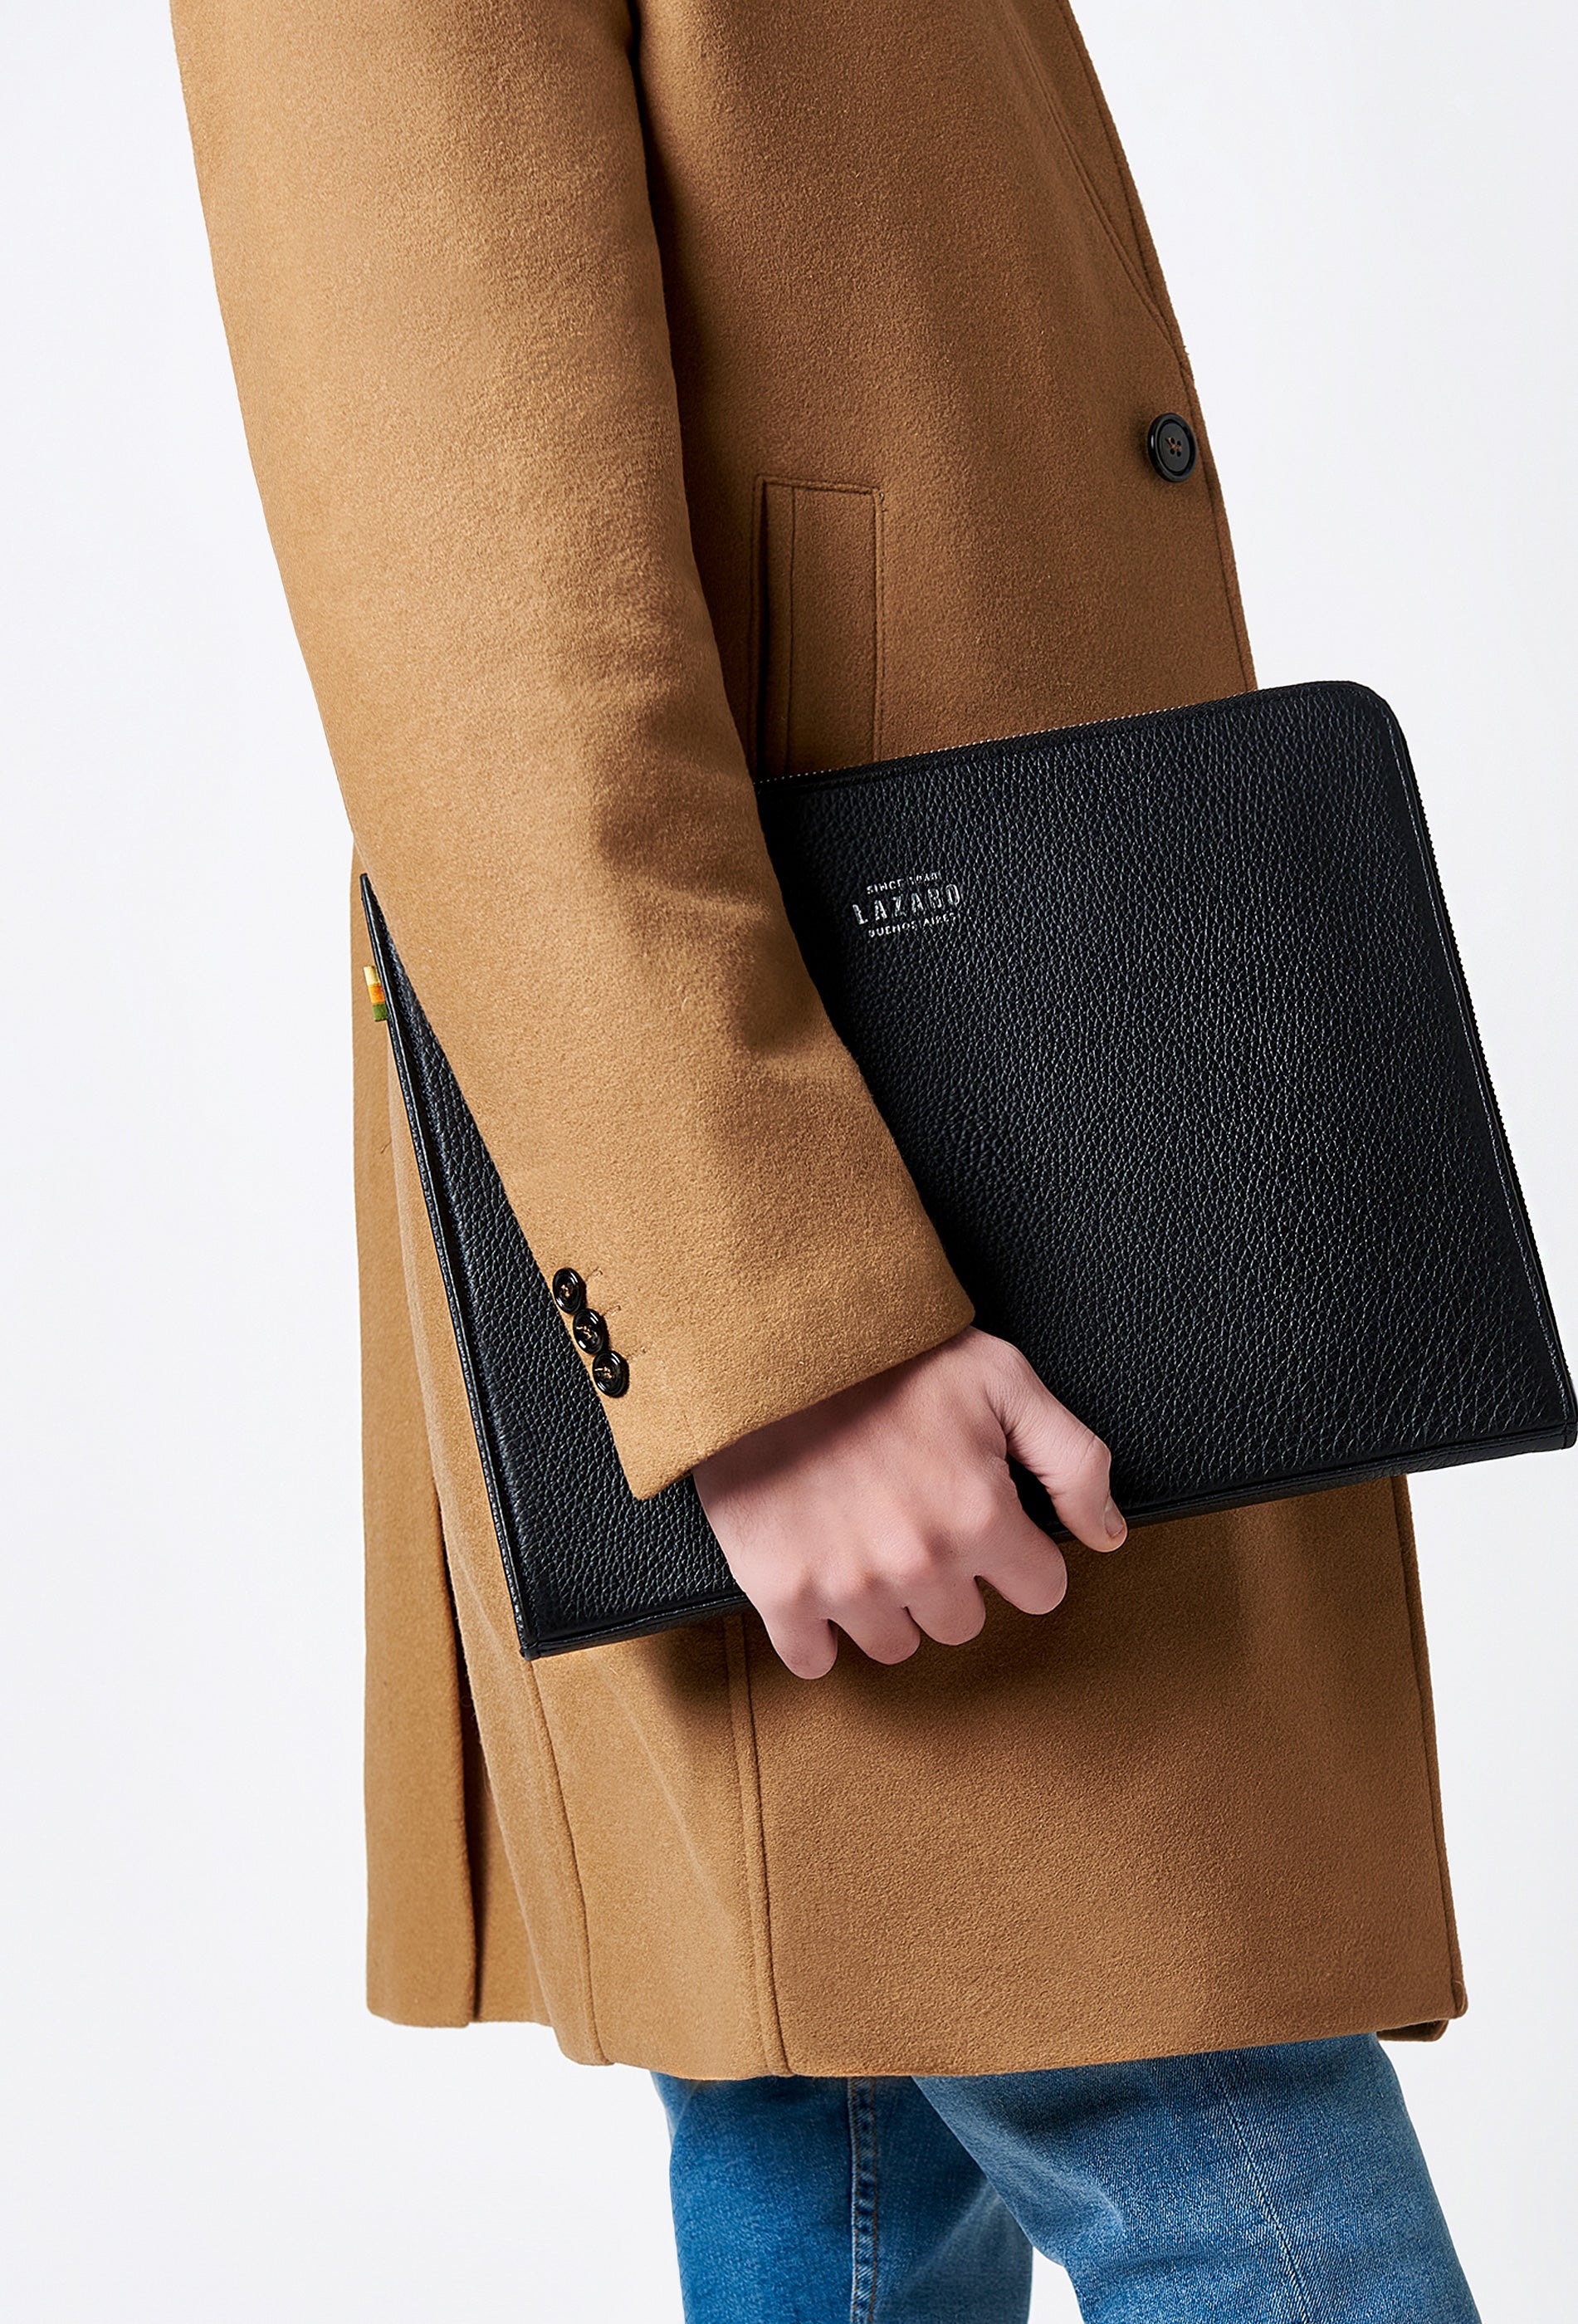 A model carries a sophisticated black leather slim computer case, showcasing its sophisticated design. The bag features internal pockets and compartments, adding to its elegant appeal. The model confidently displays the bag's size and craftsmanship while exuding a sense of style and elegance.